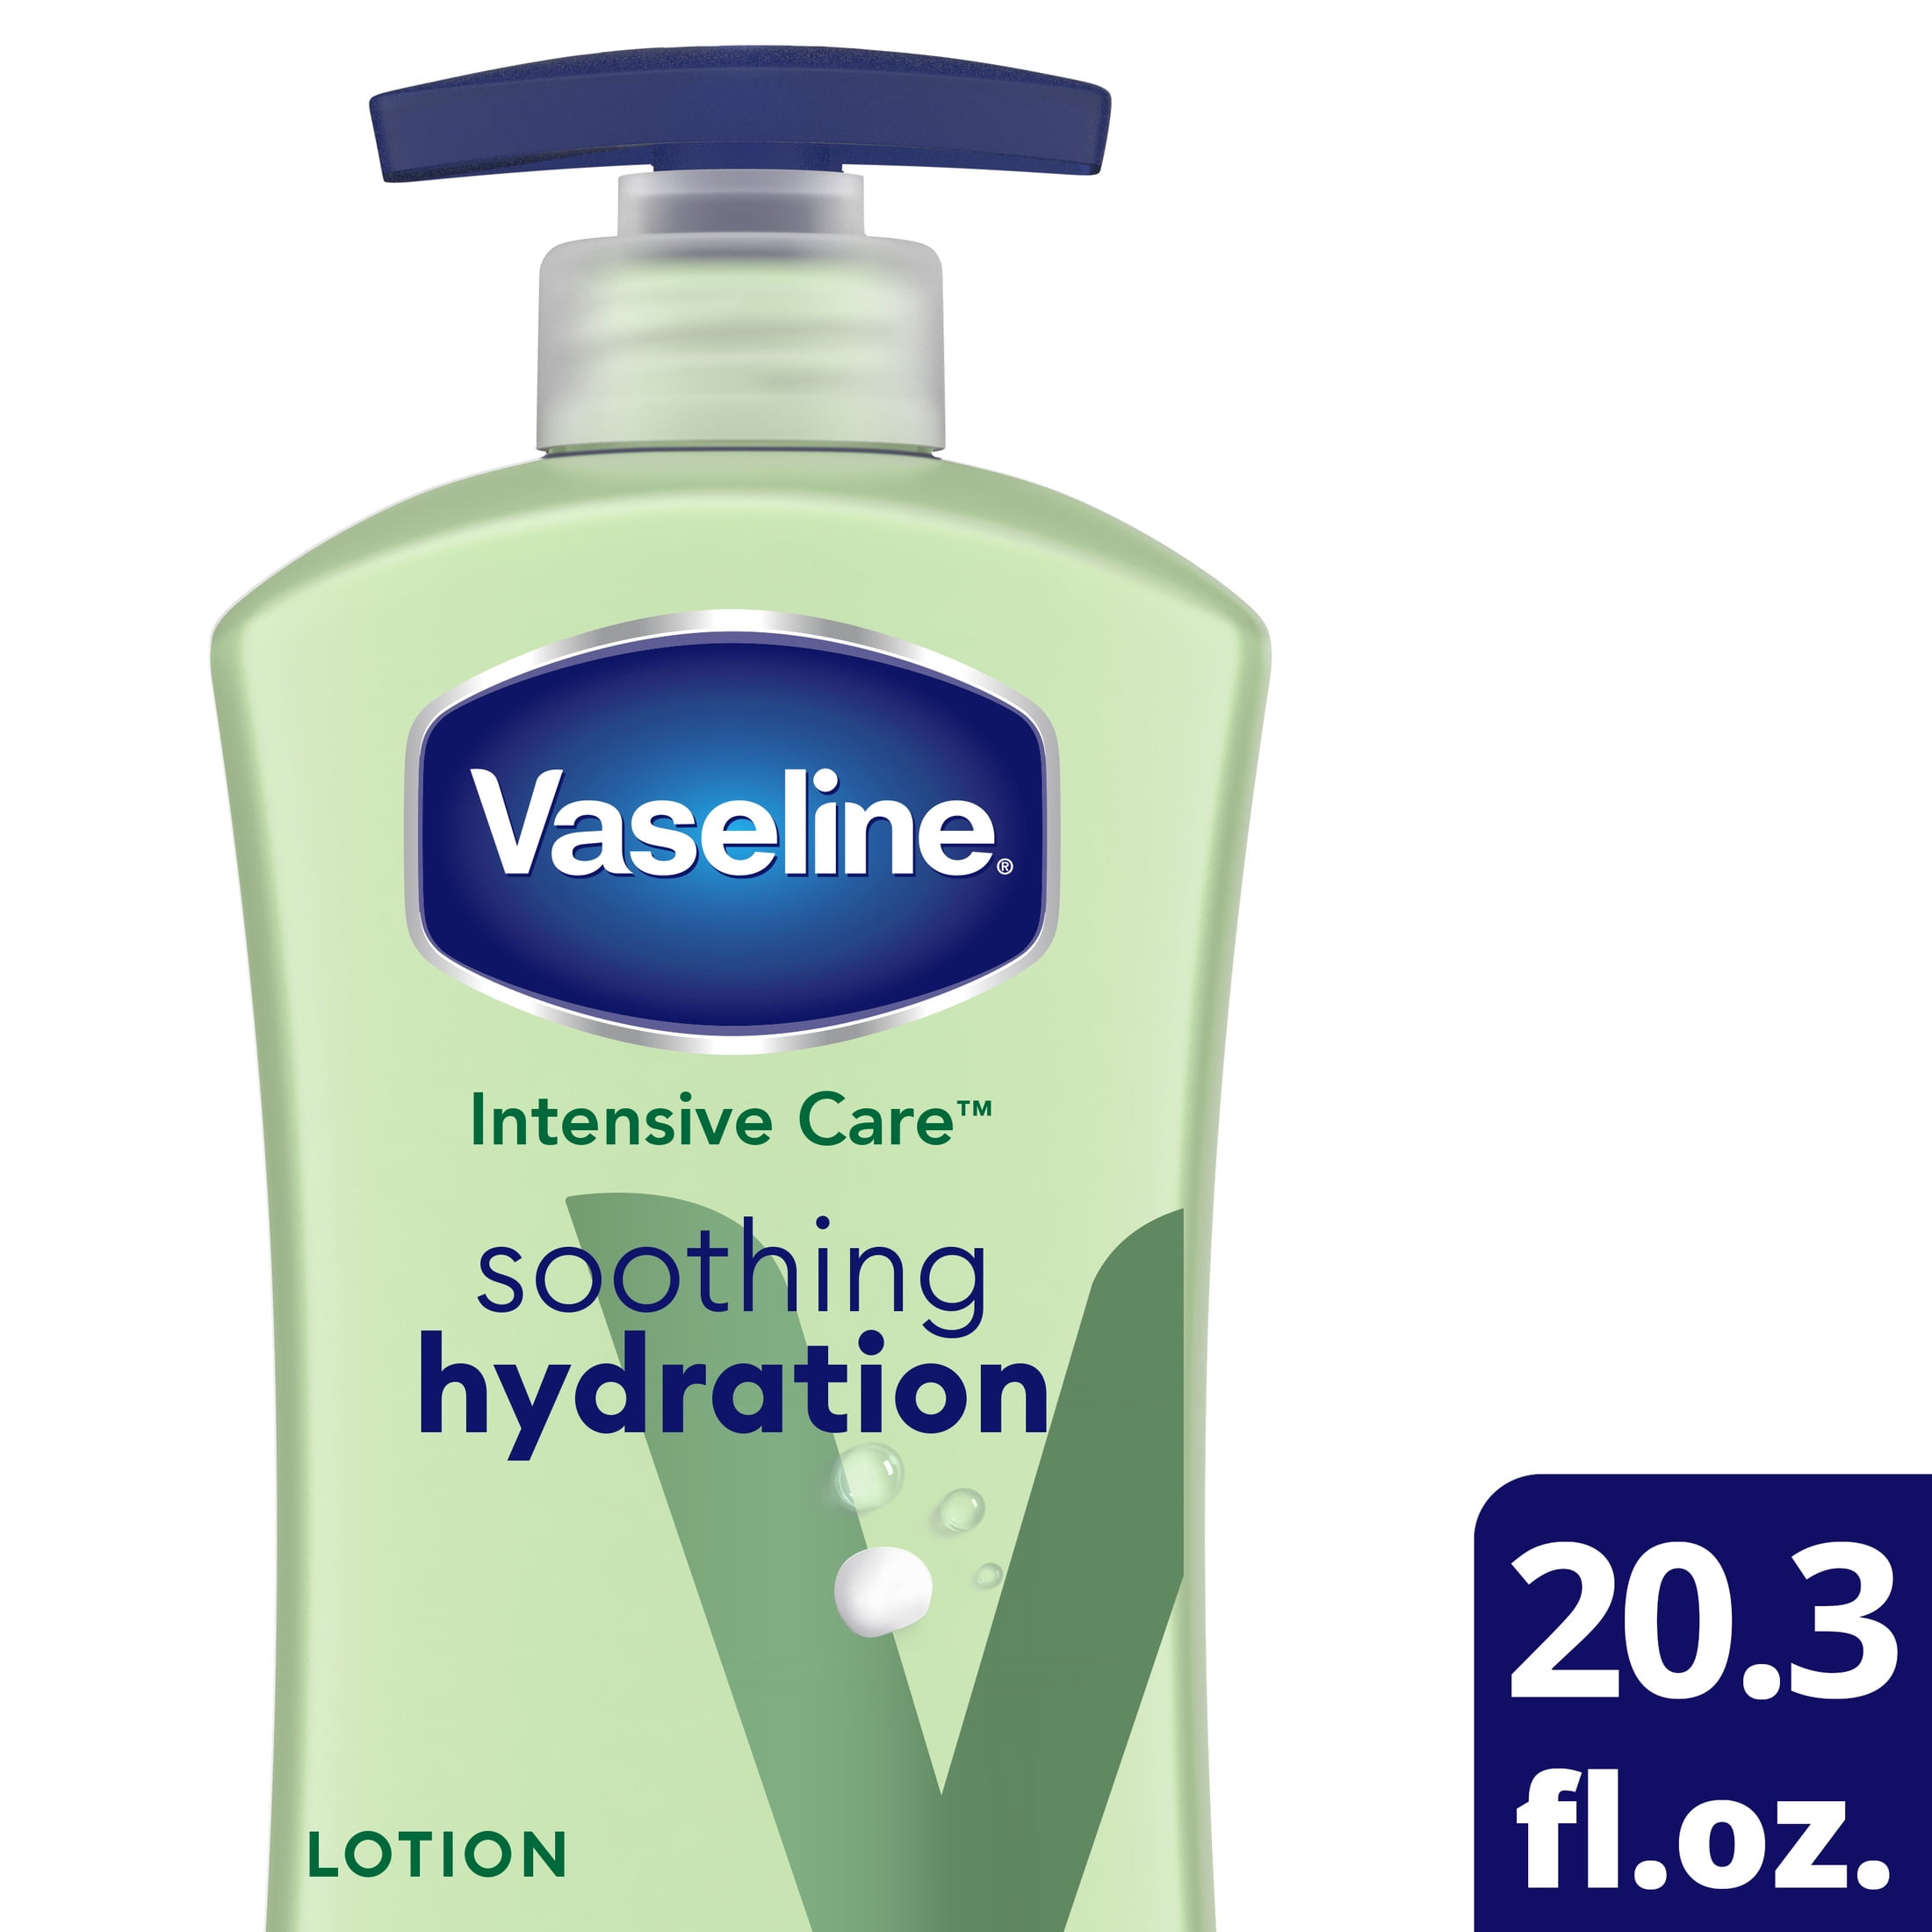 Vaseline Intensive Care Soothing Hydration Body Lotion, 20.3 oz